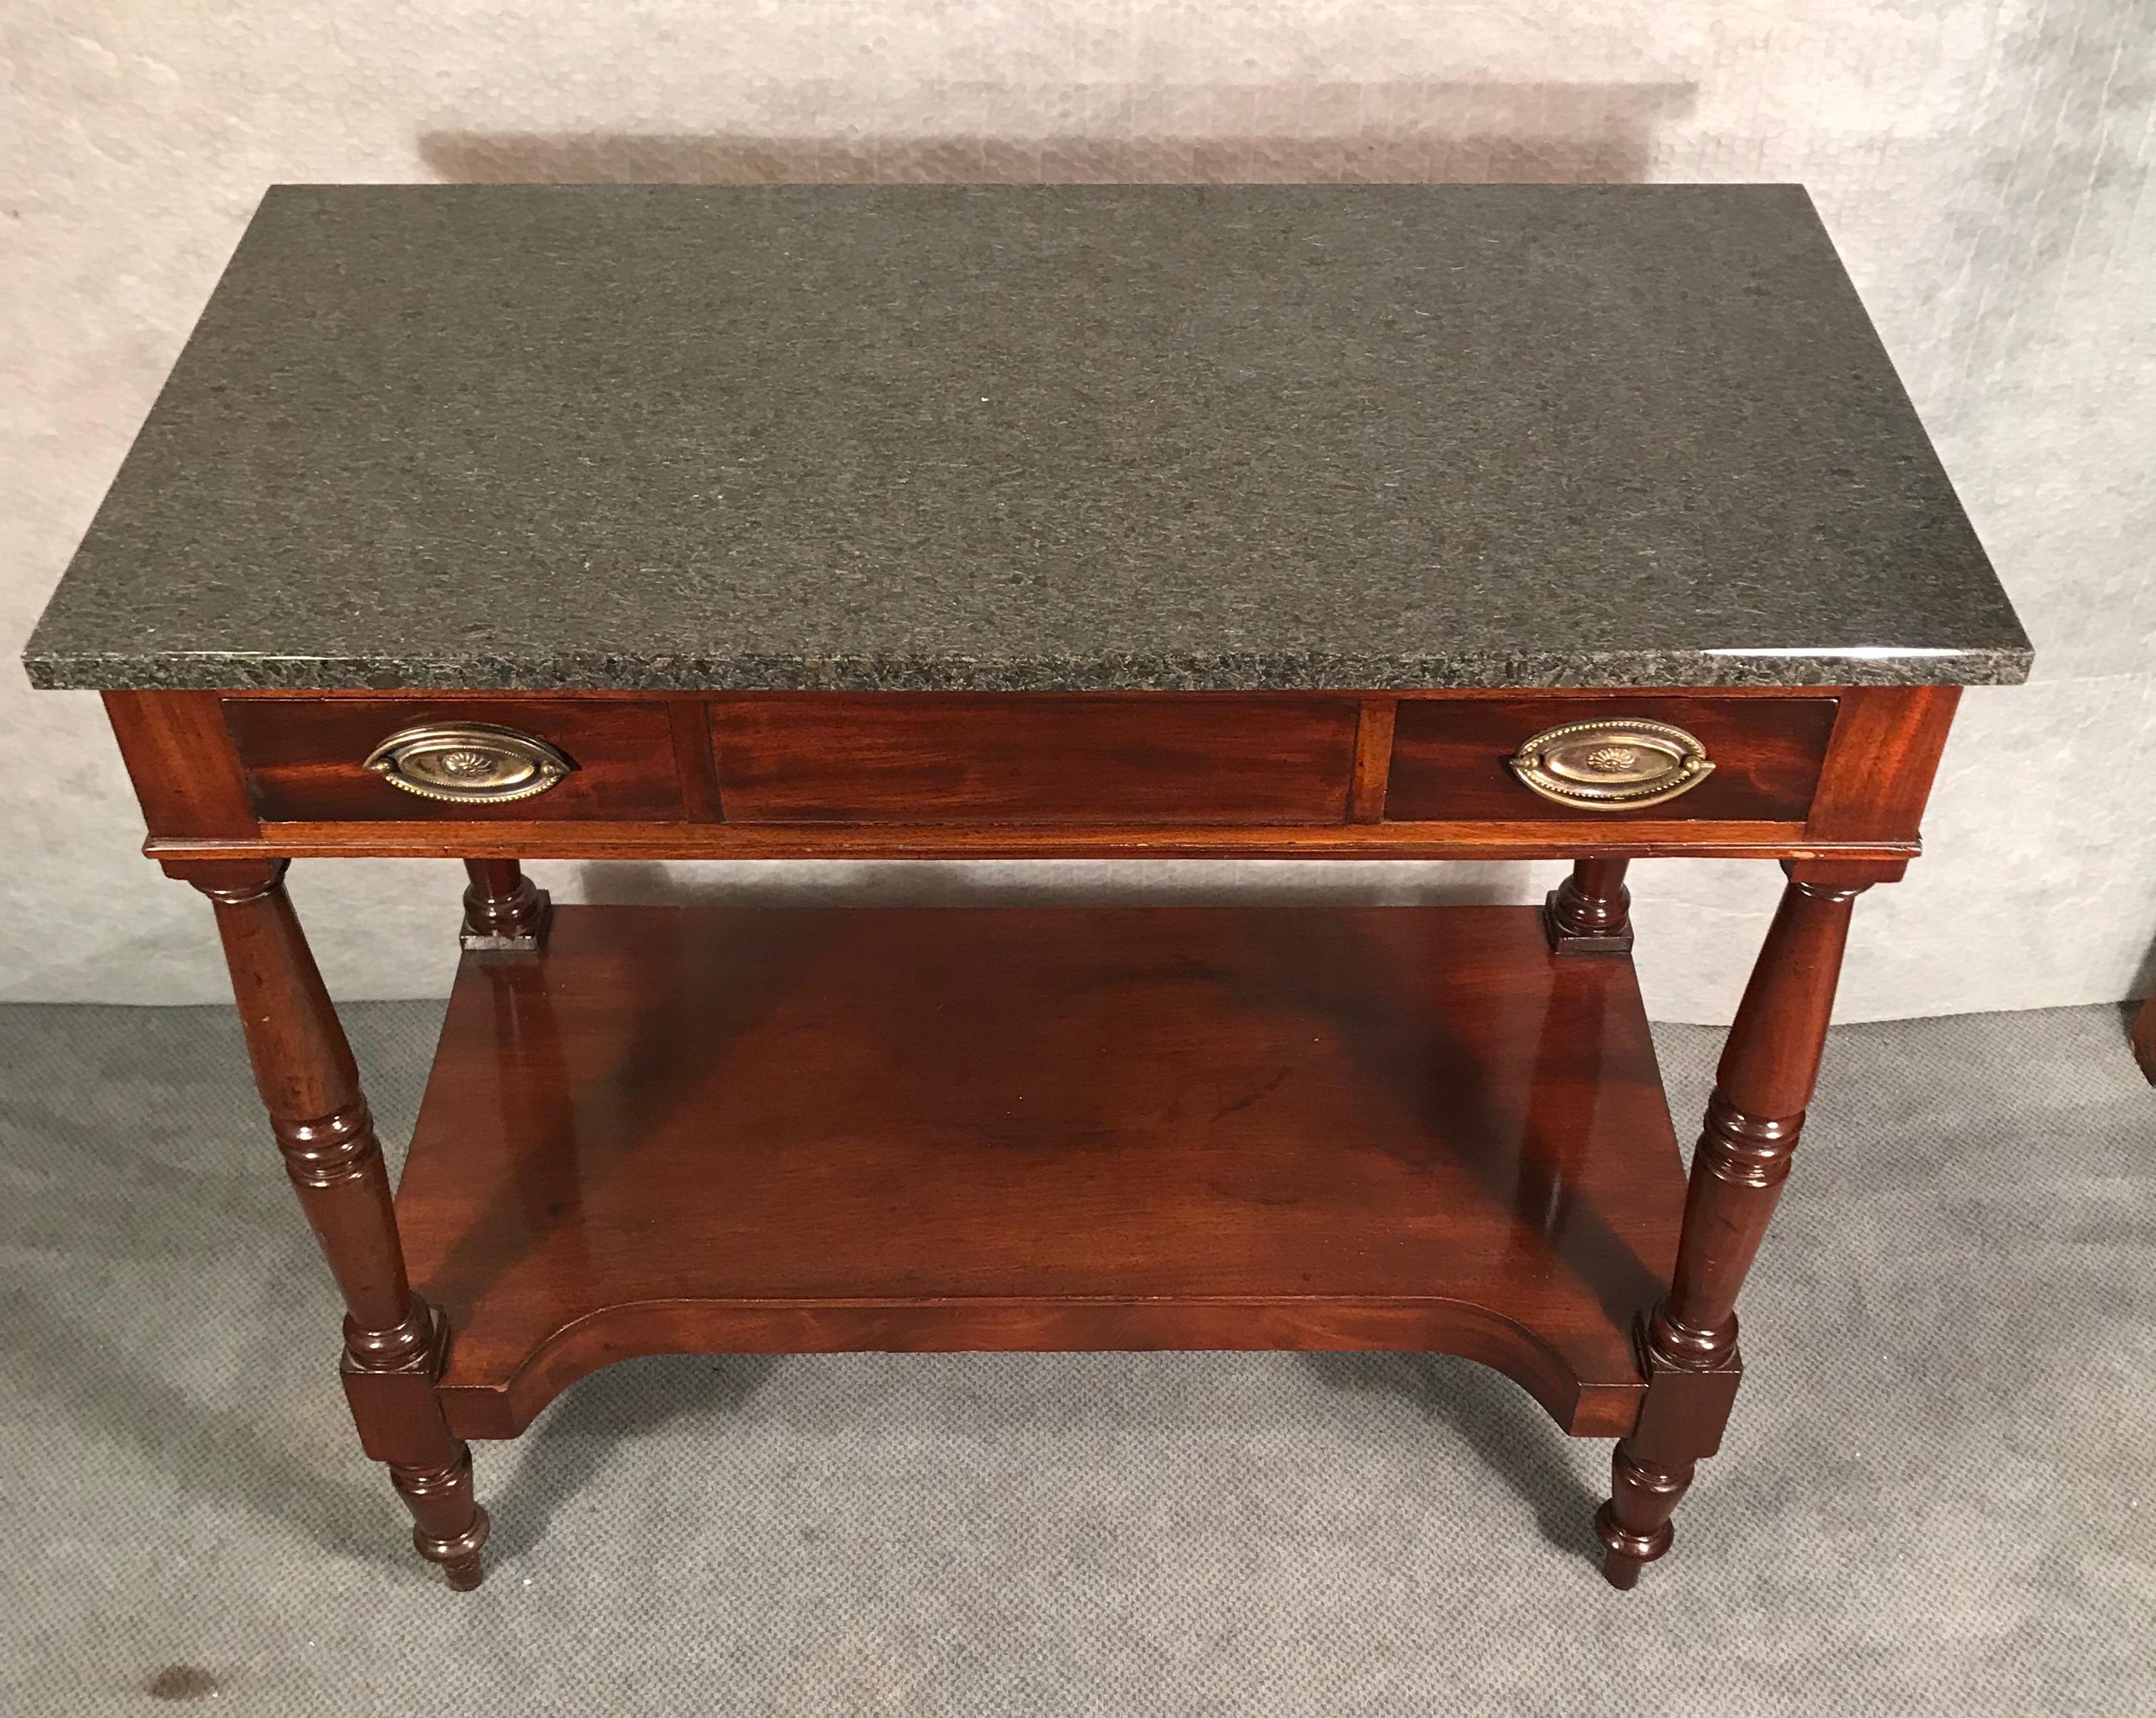 Restauration period console table, France, 1820-1830, mahogany veneer with Marble top, in very good condition. The table will be shipped from Germany, shipping costs to Boston are included.